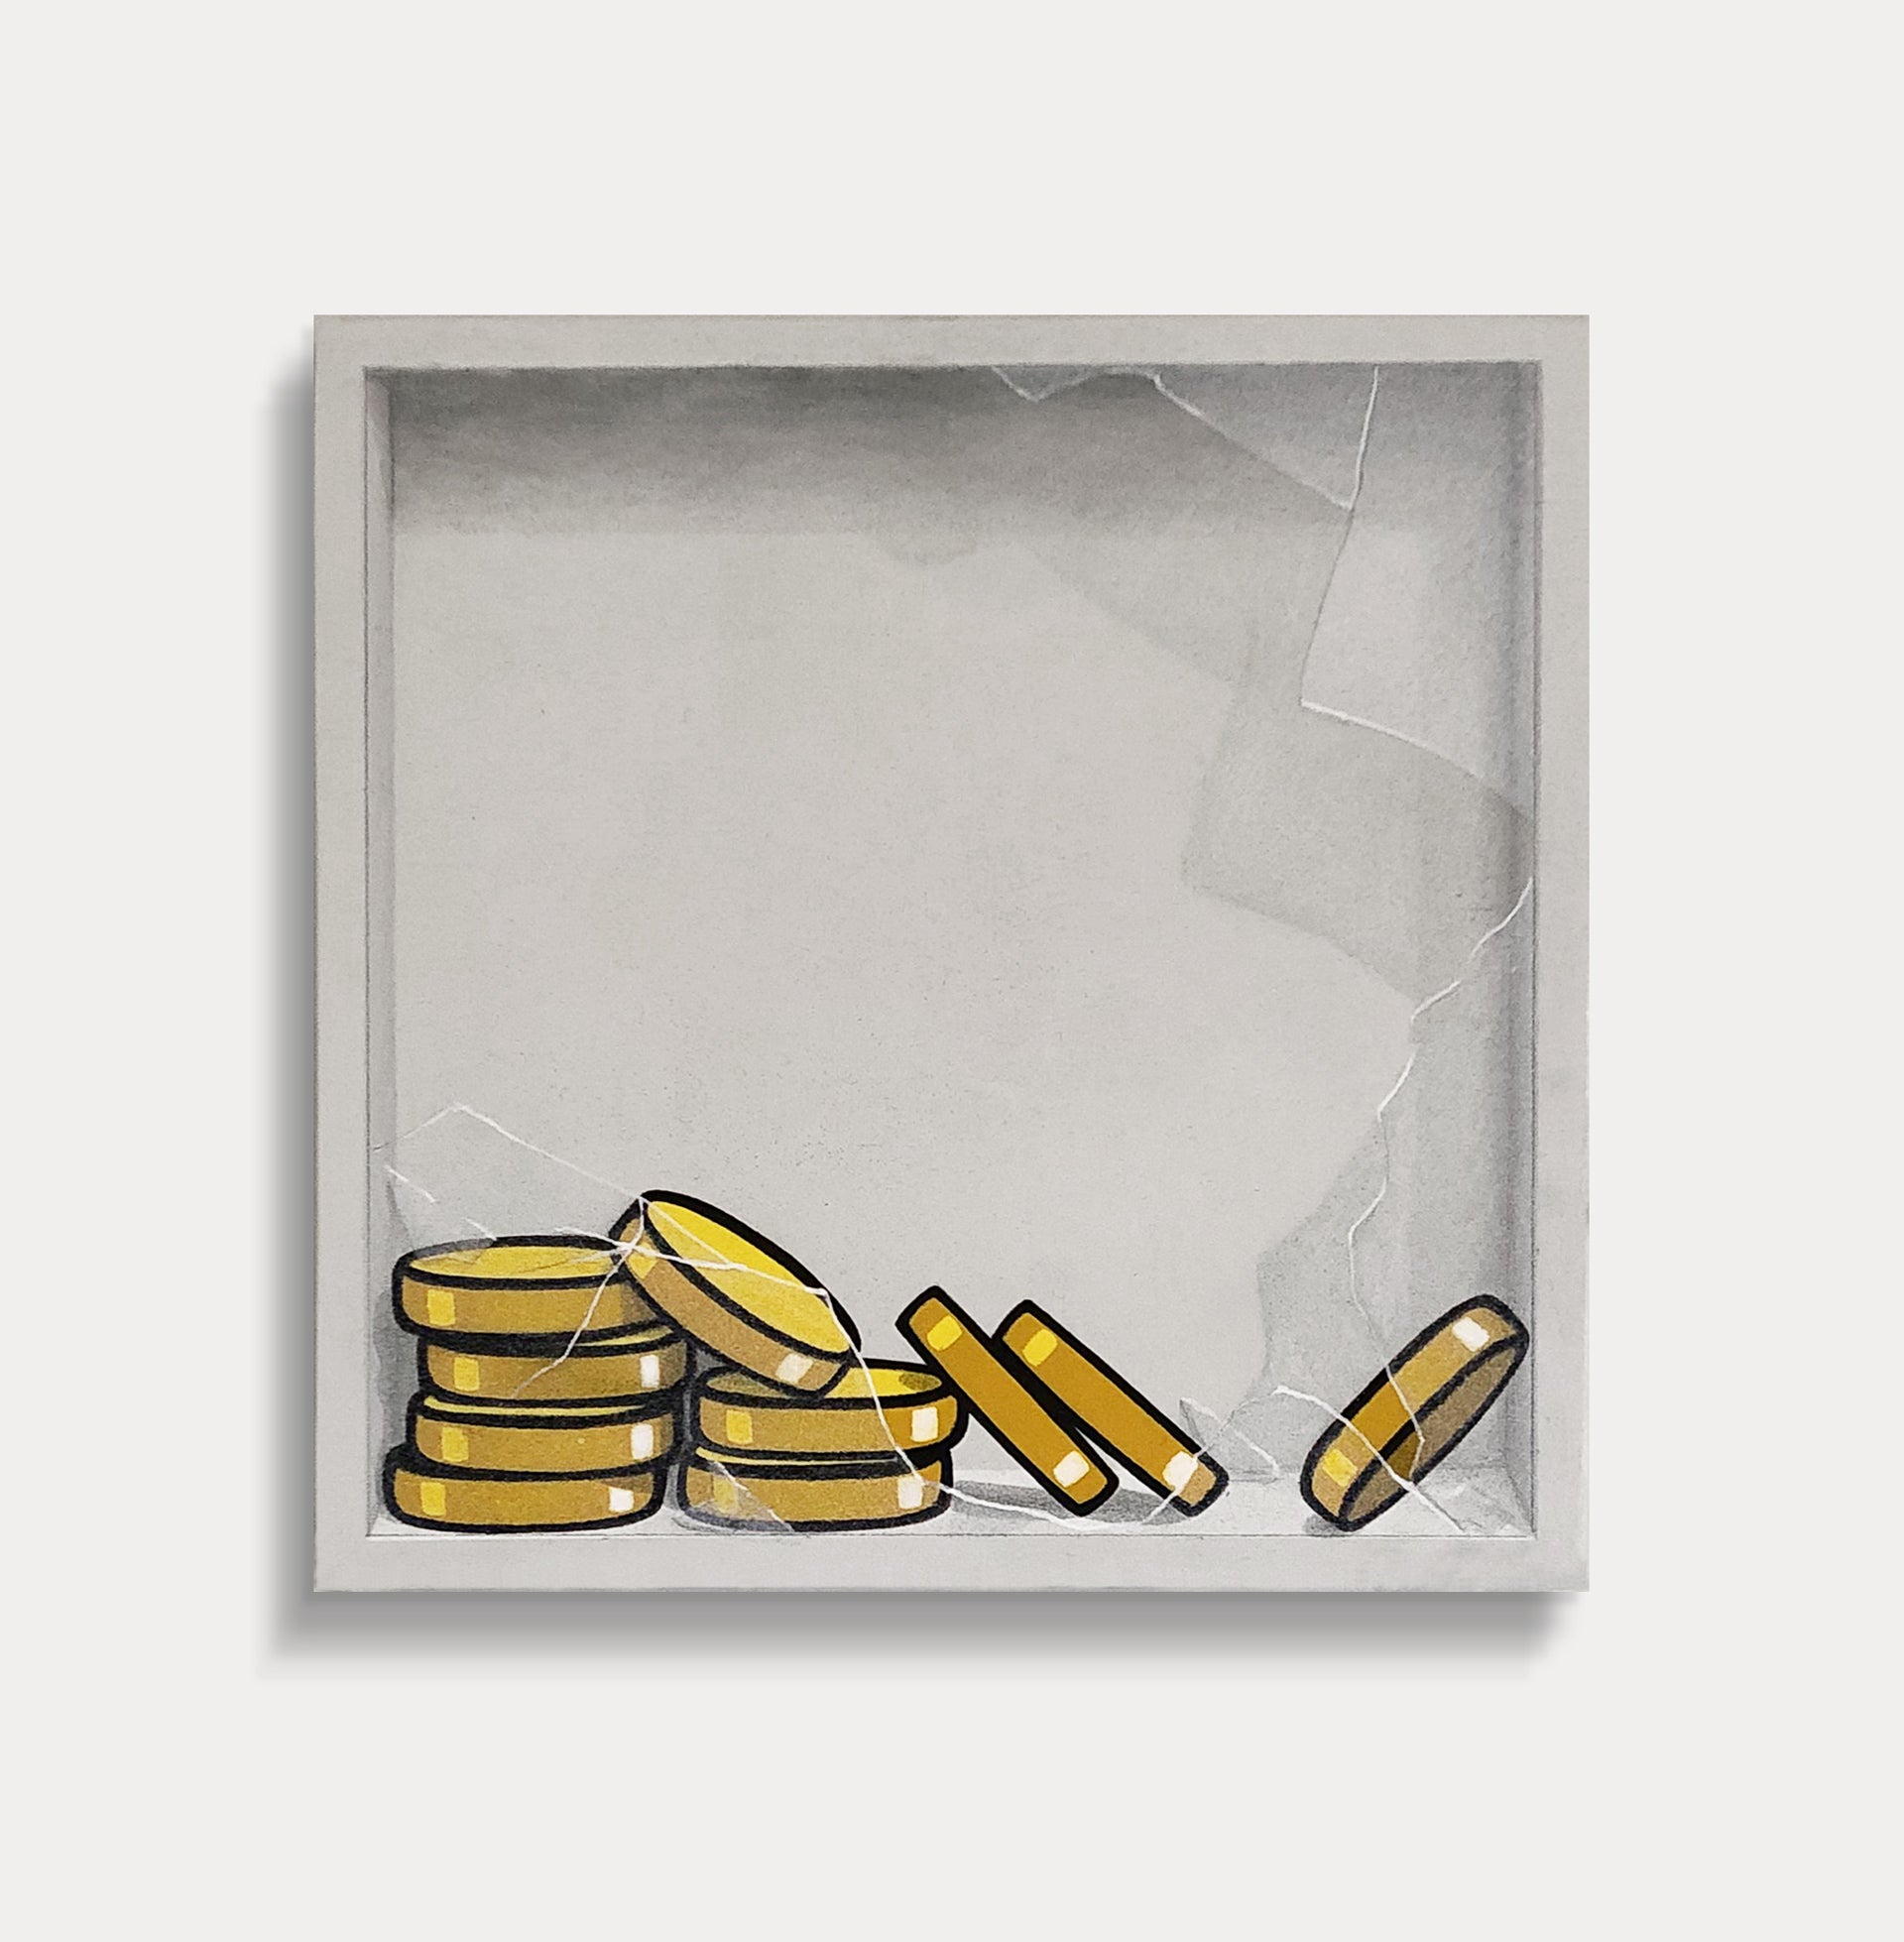 "10 Gold Coins Below ($600)" by E.LEE